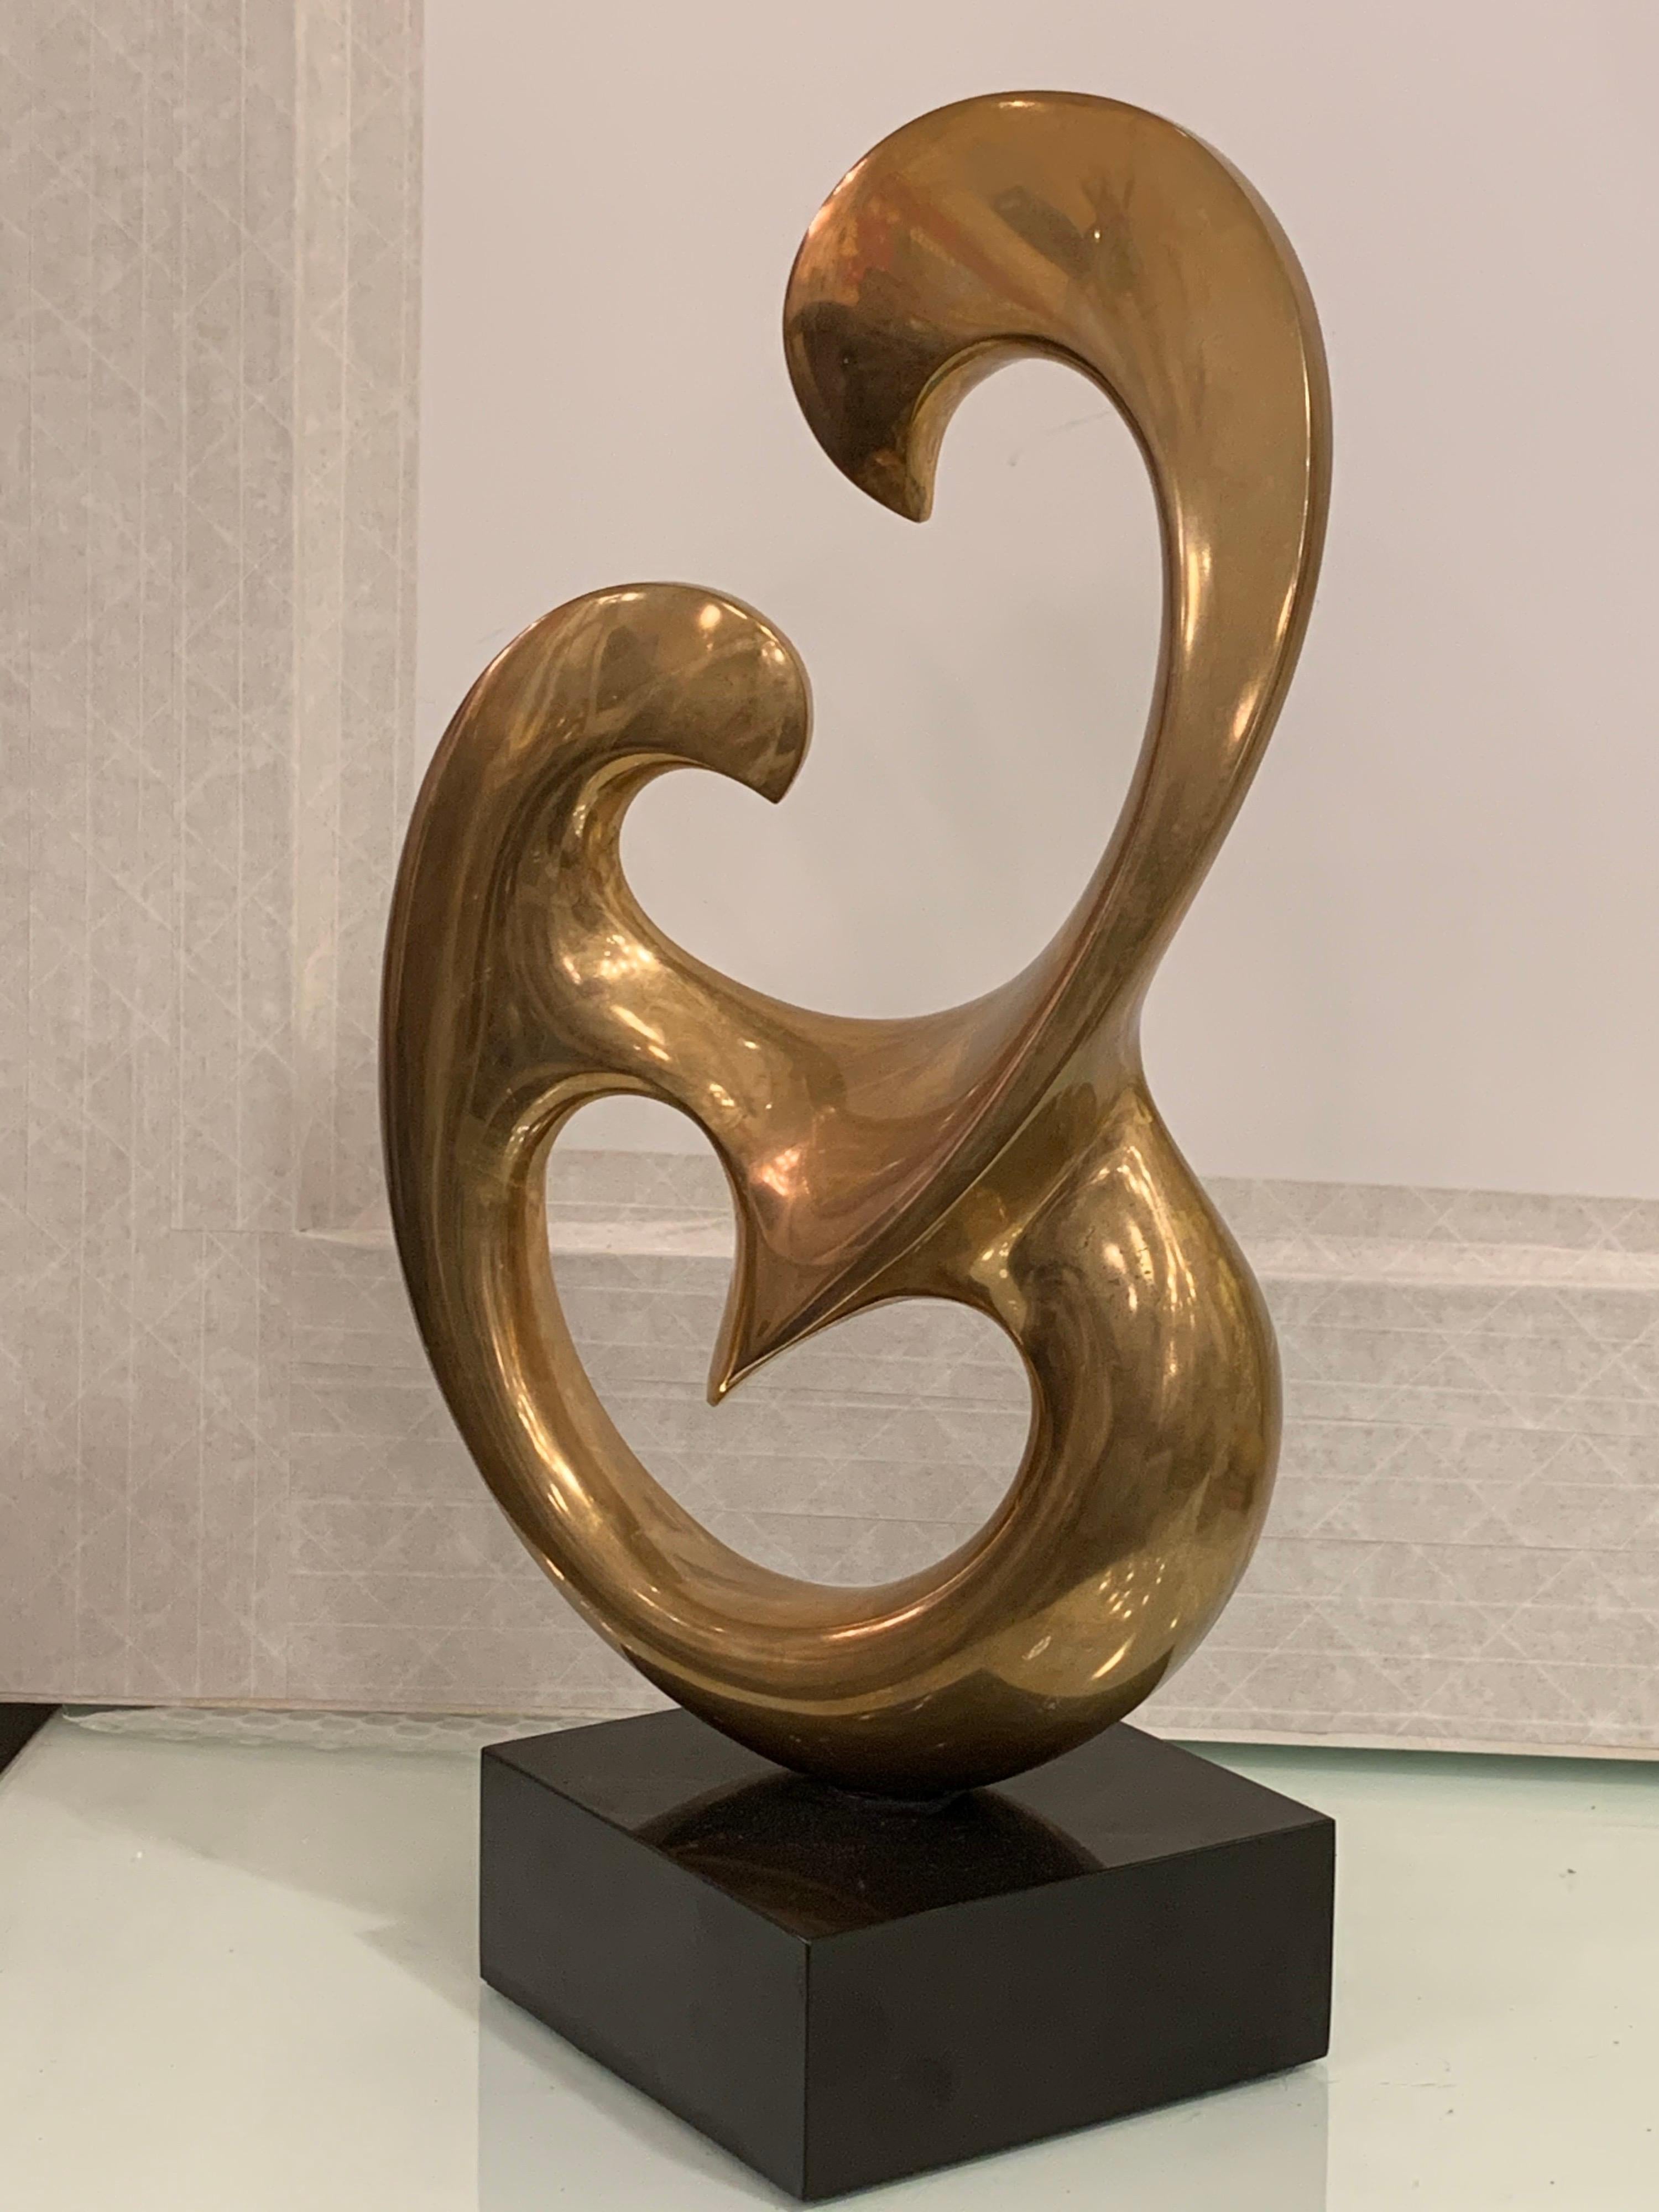 Canadian Bronze Sculpture by Antonio Grediaga Kieff, Signed and Numbered